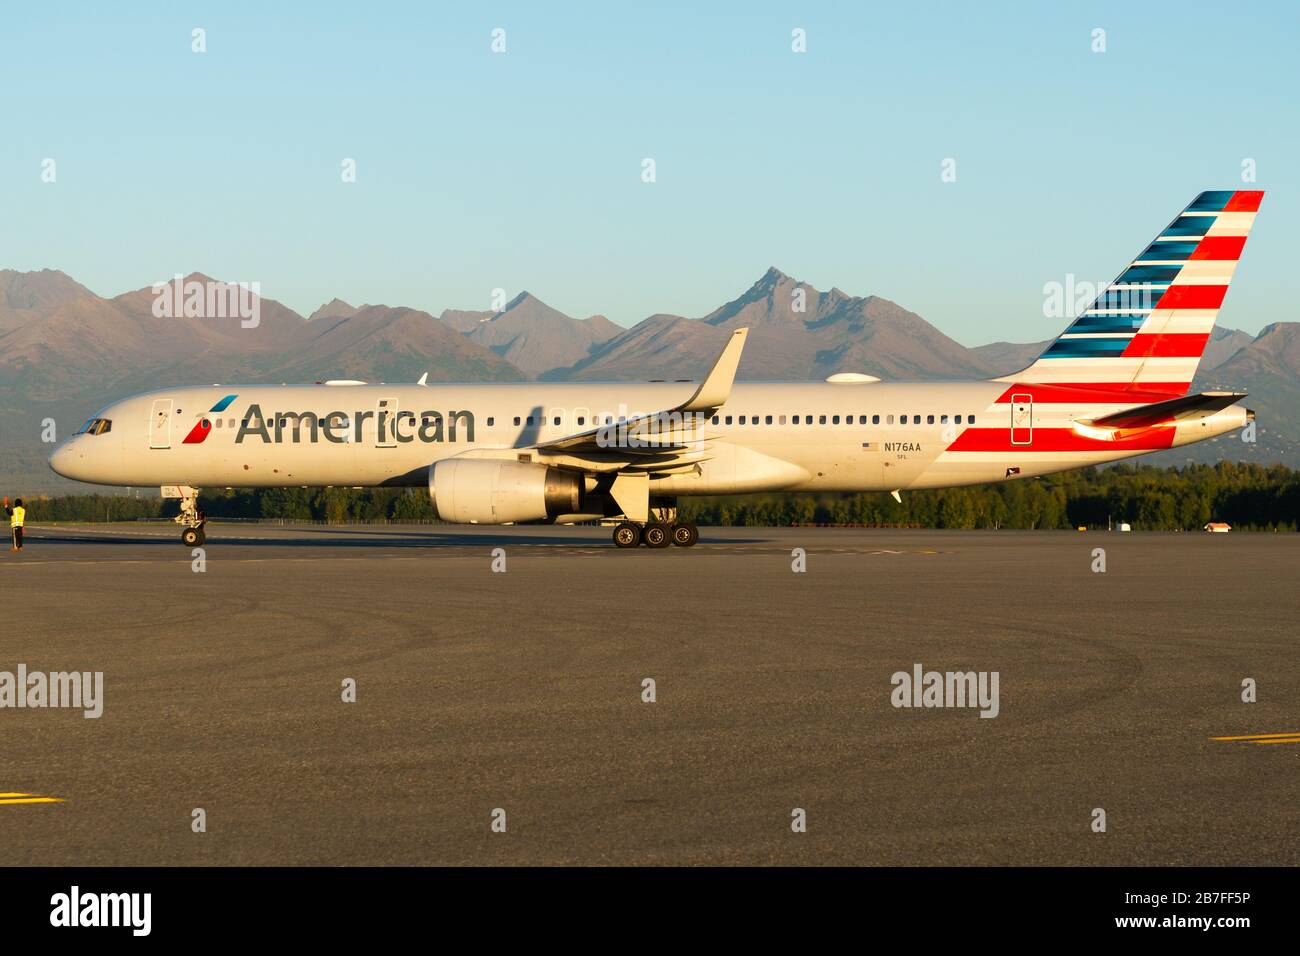 American Airlines Boeing 757 taxiing at Ted Stevens Anchorage Airport in Alaska, USA. Single aisle passenger aircraft registered as N176AA. Stock Photo